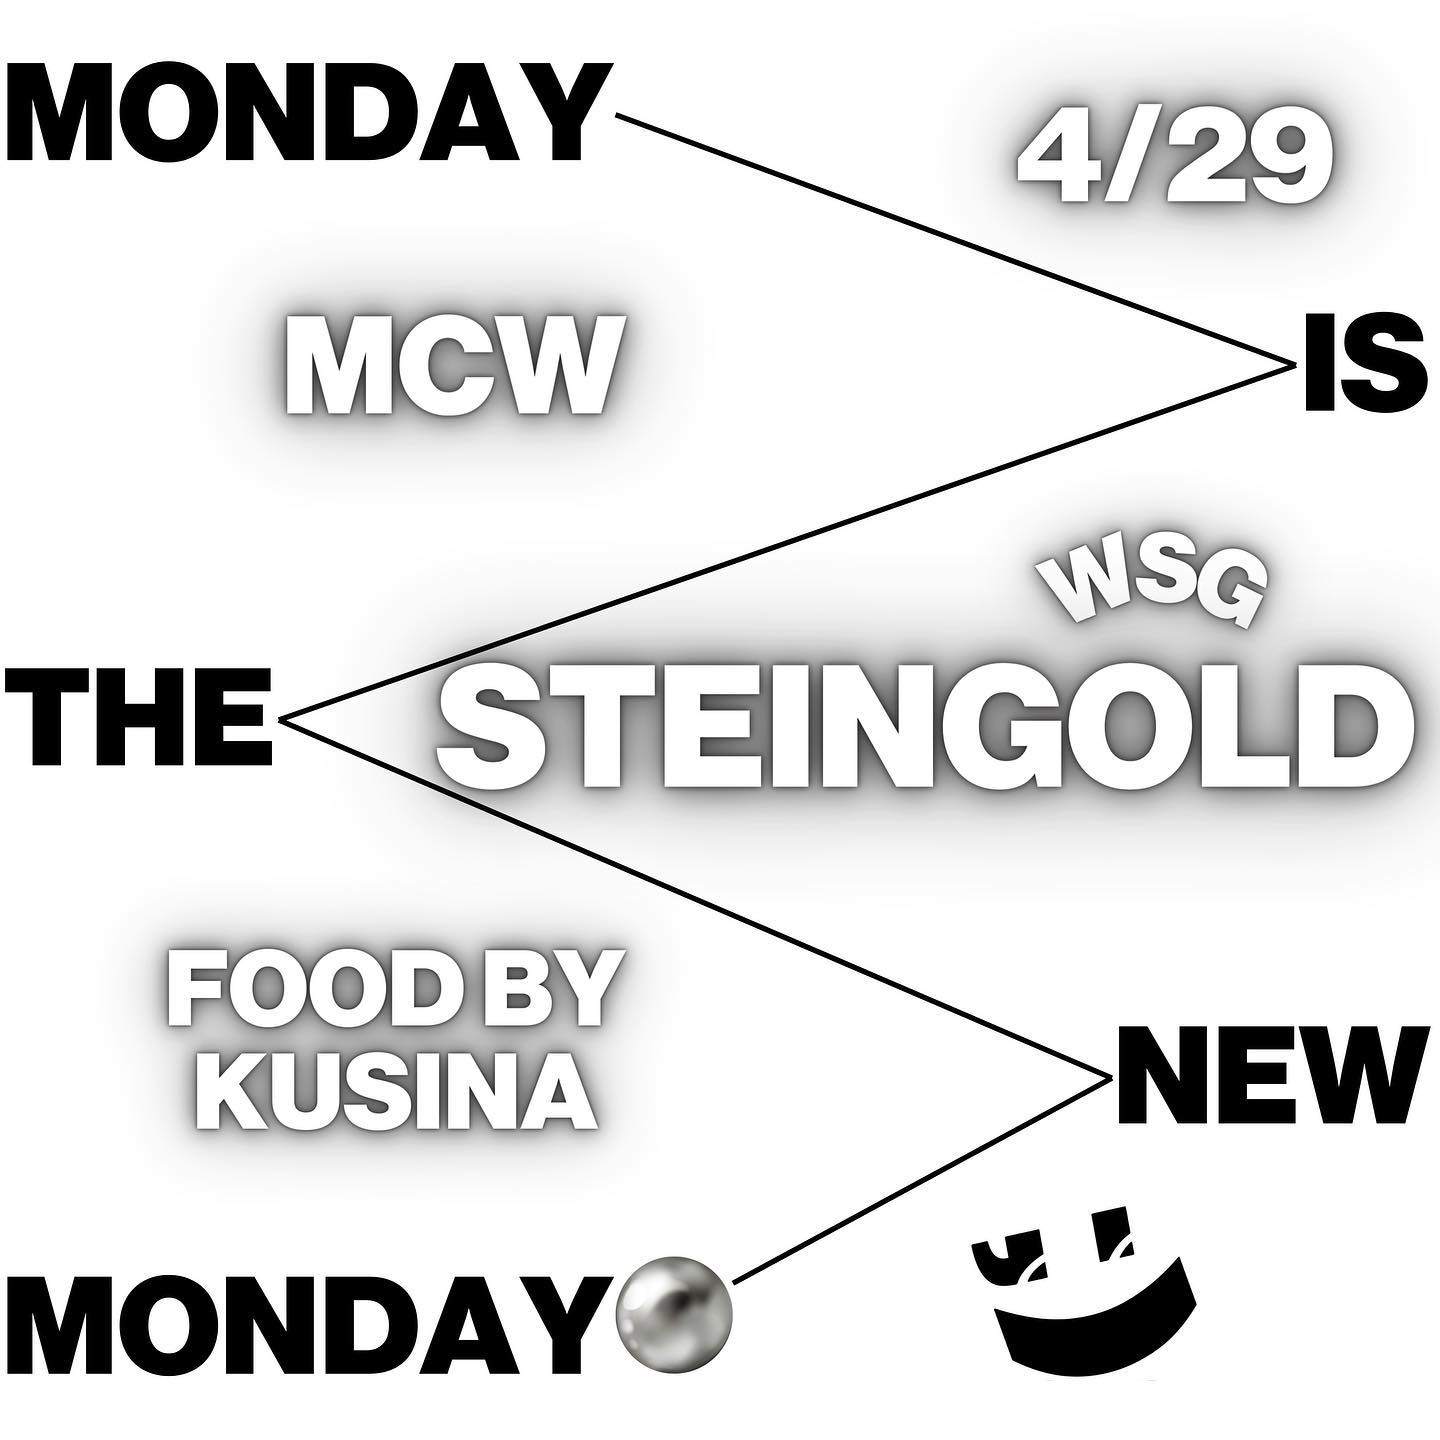 Monday is the New Monday wsg Steingold - Página frontal